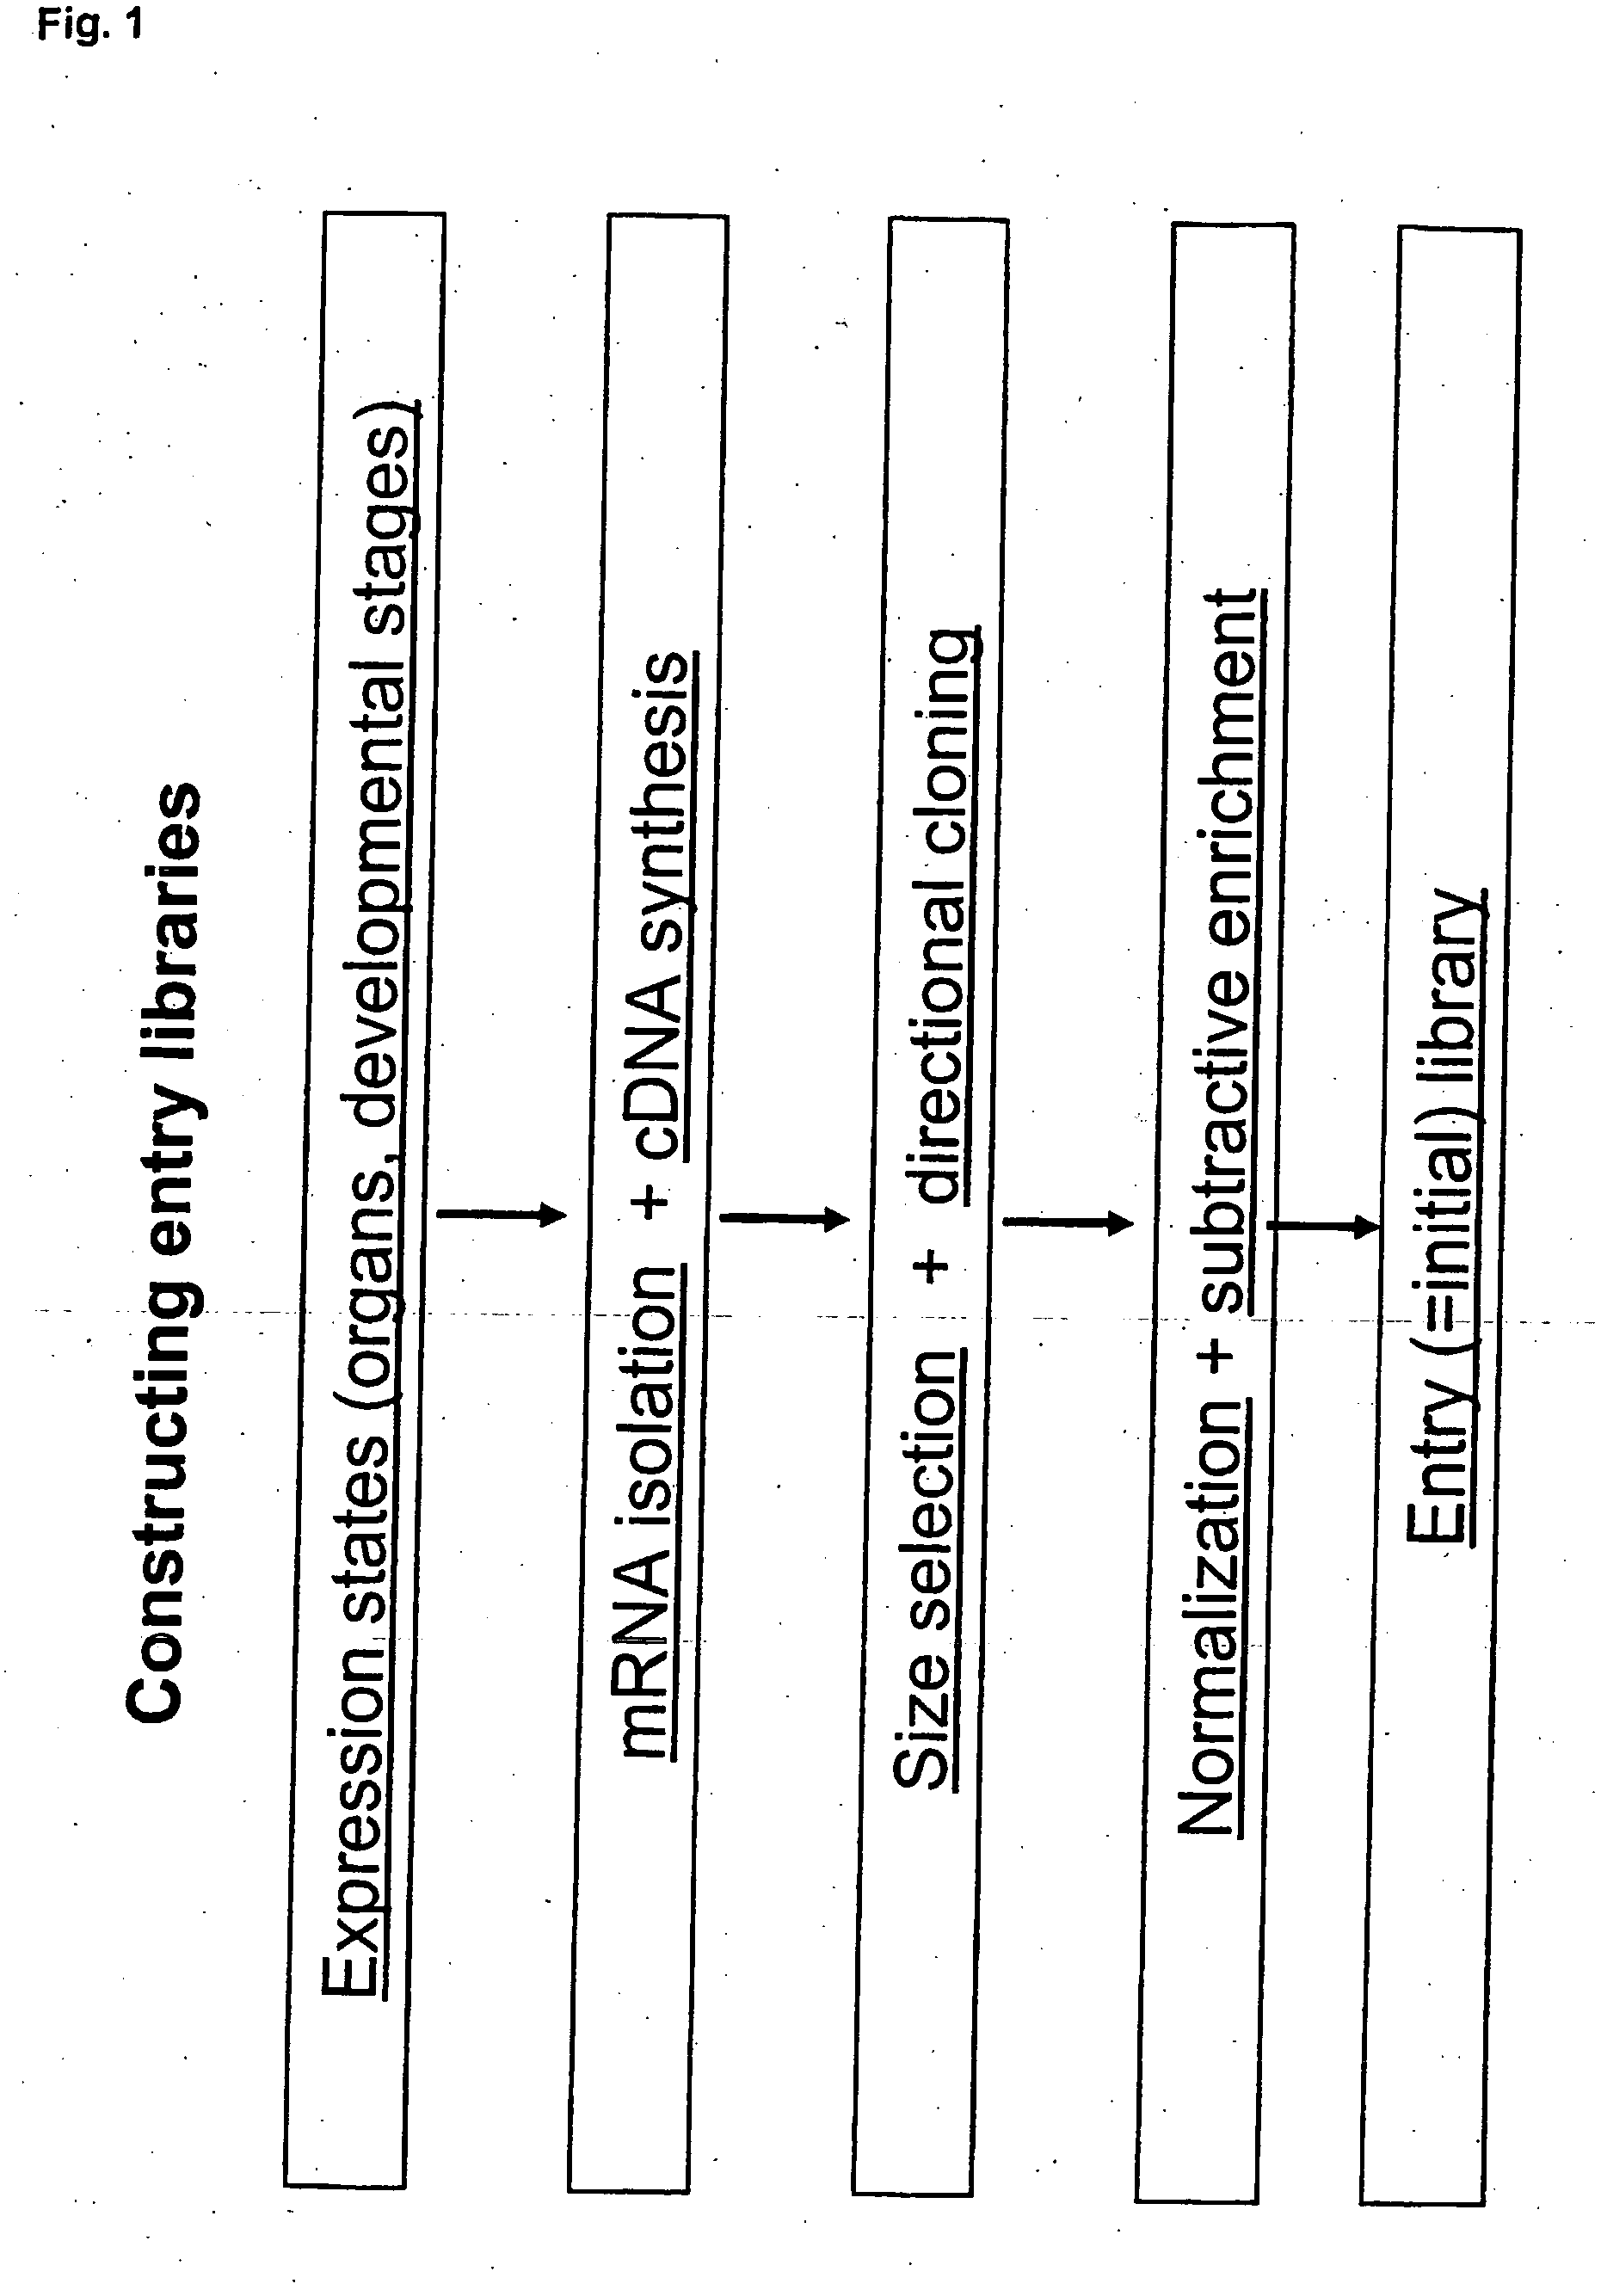 Method for evolving a cell having desired phenotype and evolved cells